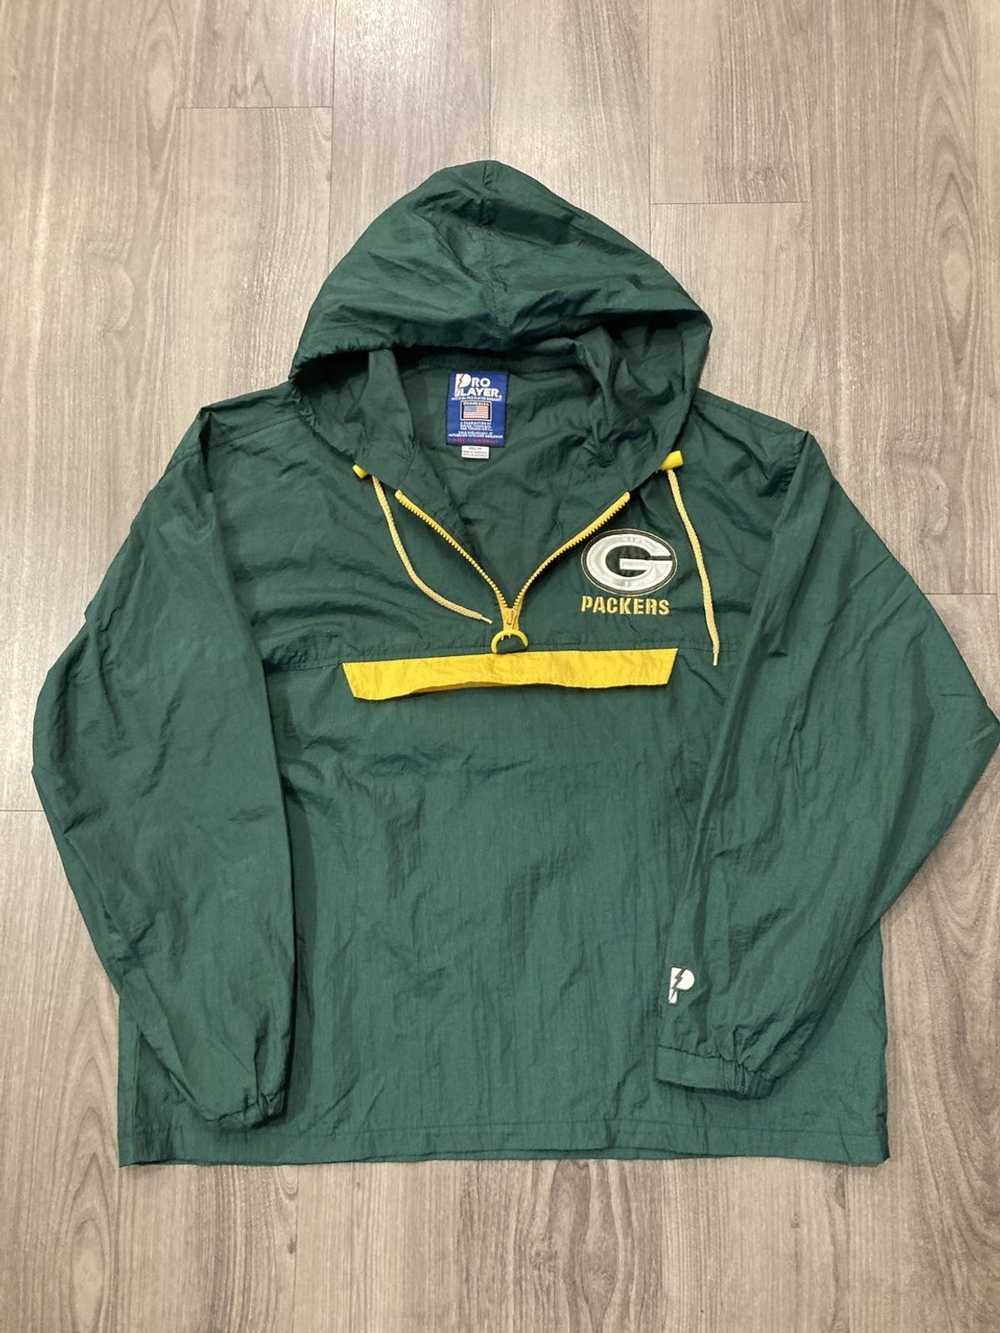 Vintage Majestic NFL Green Bay Packers Embroidered Sweater Green (XL) –  Chop Suey Official